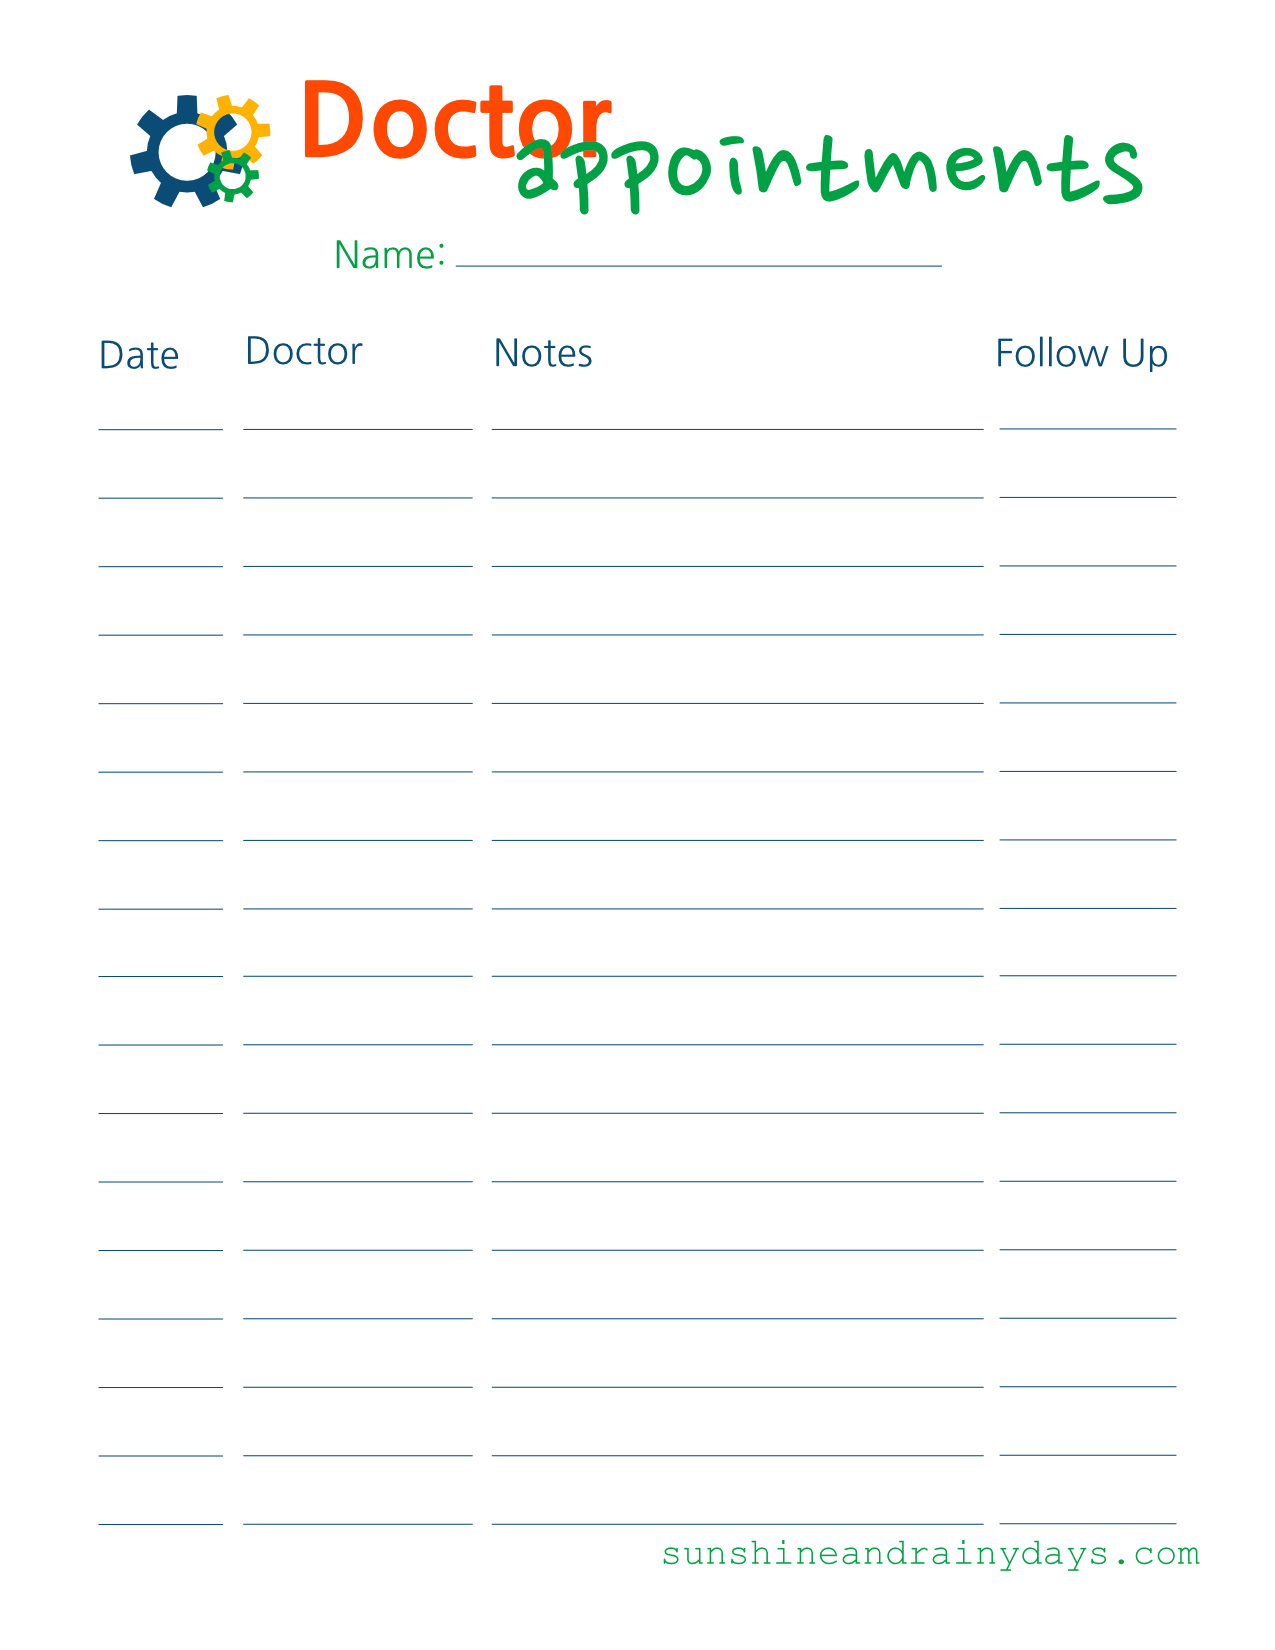 appointment-spreadsheet-free-within-doctor-appointments-free-printable